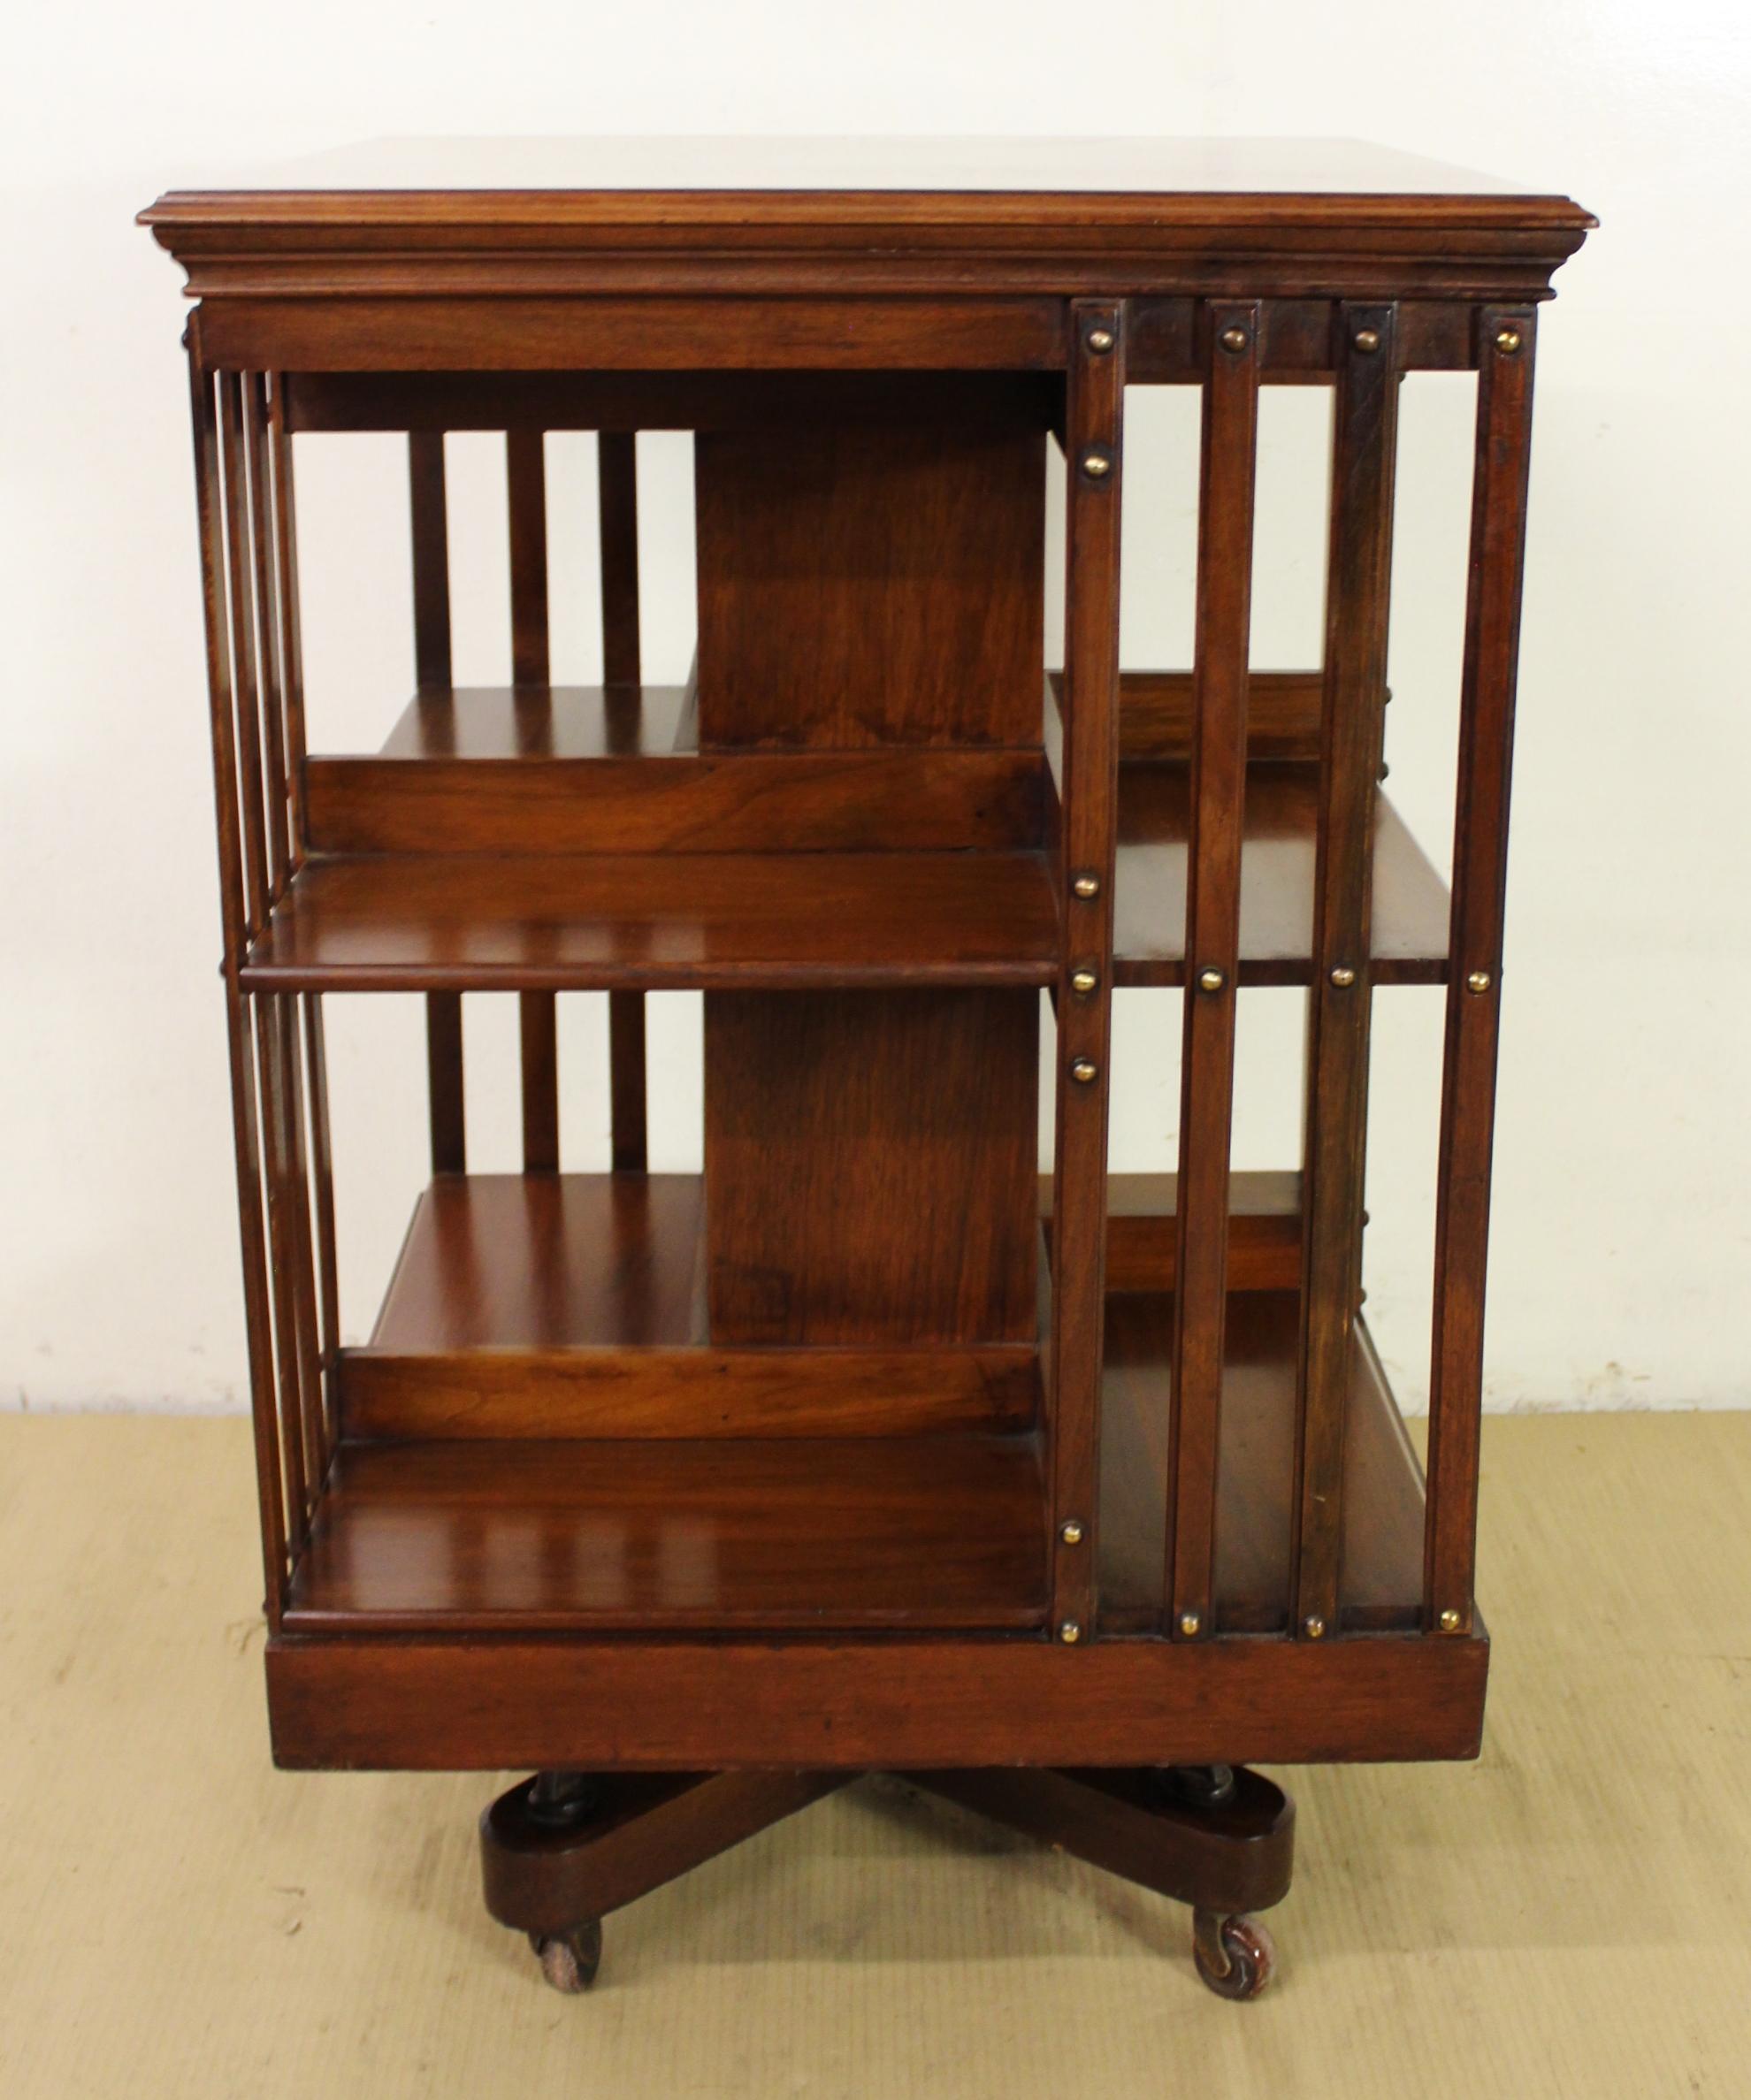 Edwardian Iron Based Revolving Bookcase In Good Condition For Sale In Poling, West Sussex